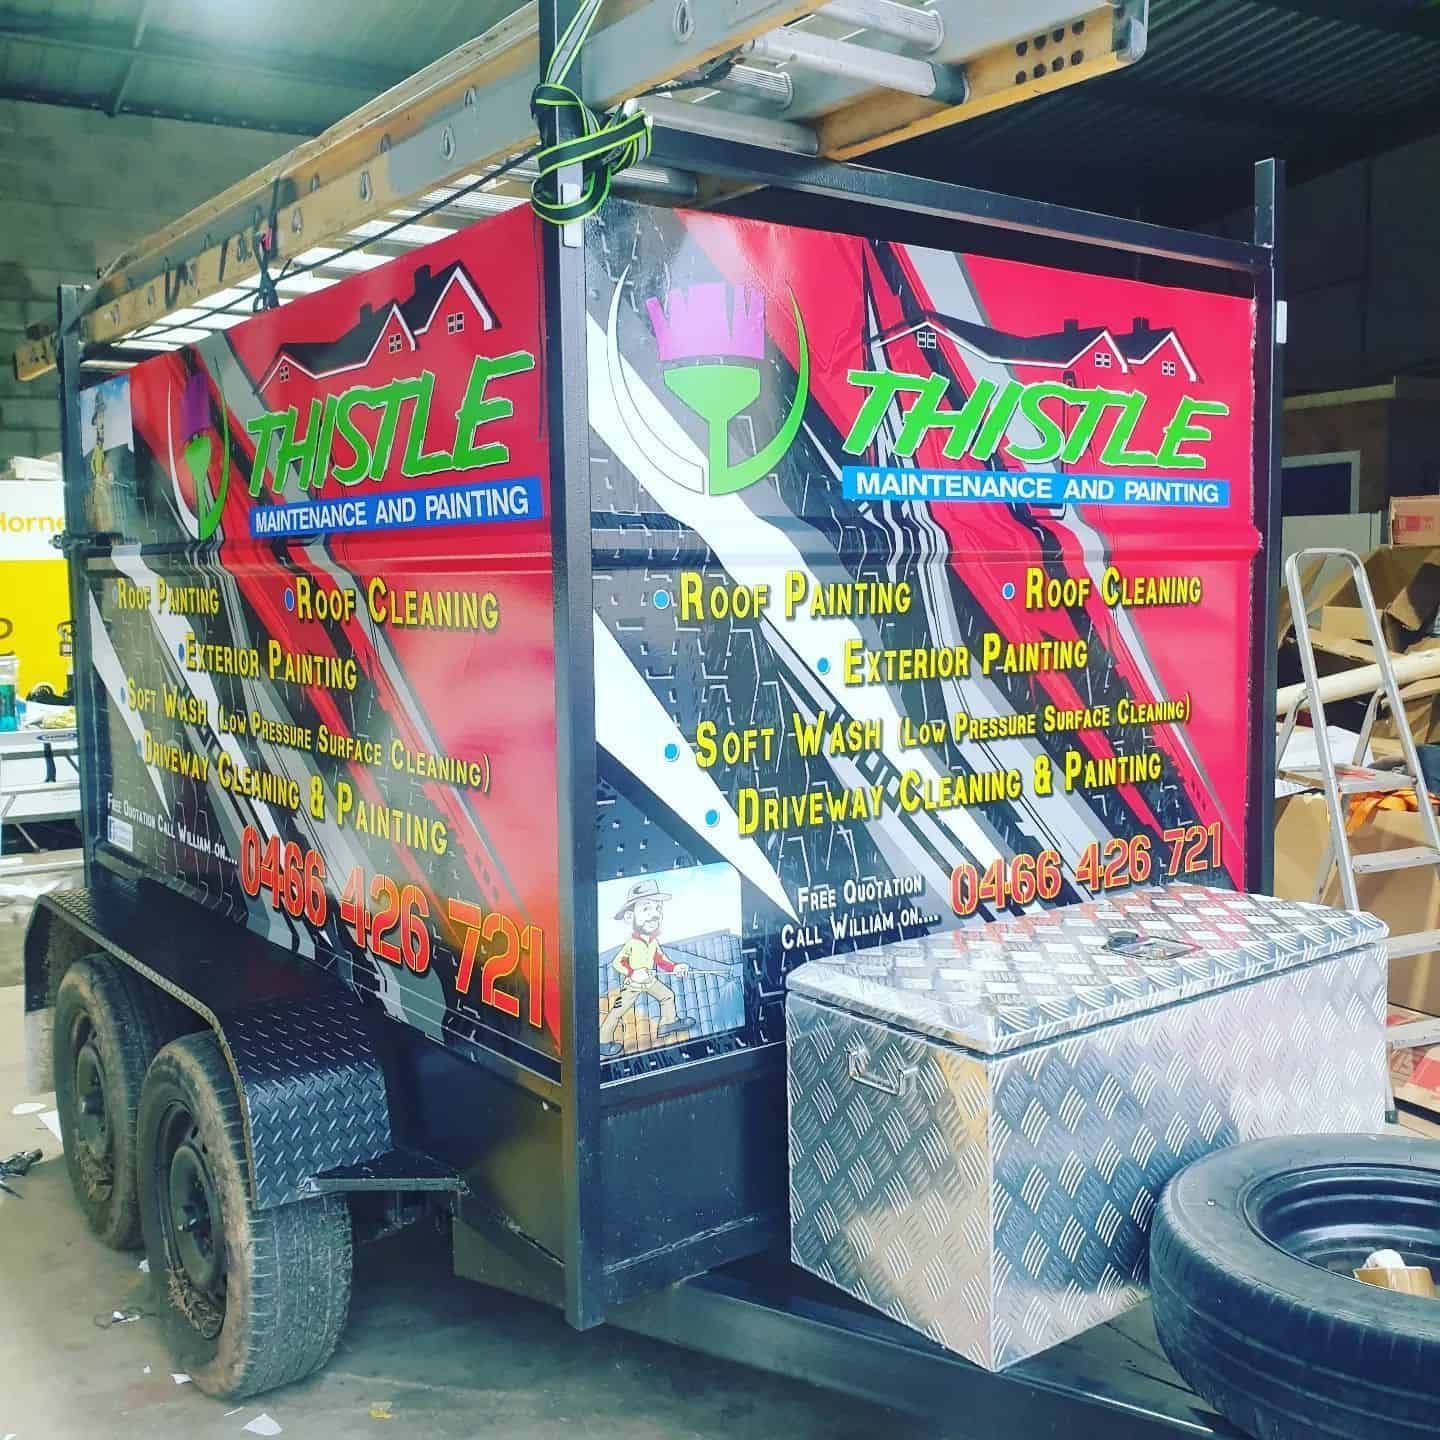 Sticker Wrap on Vehicle - Vehicle Signage & Wraps in Murwillumbah and Surrounding Areas